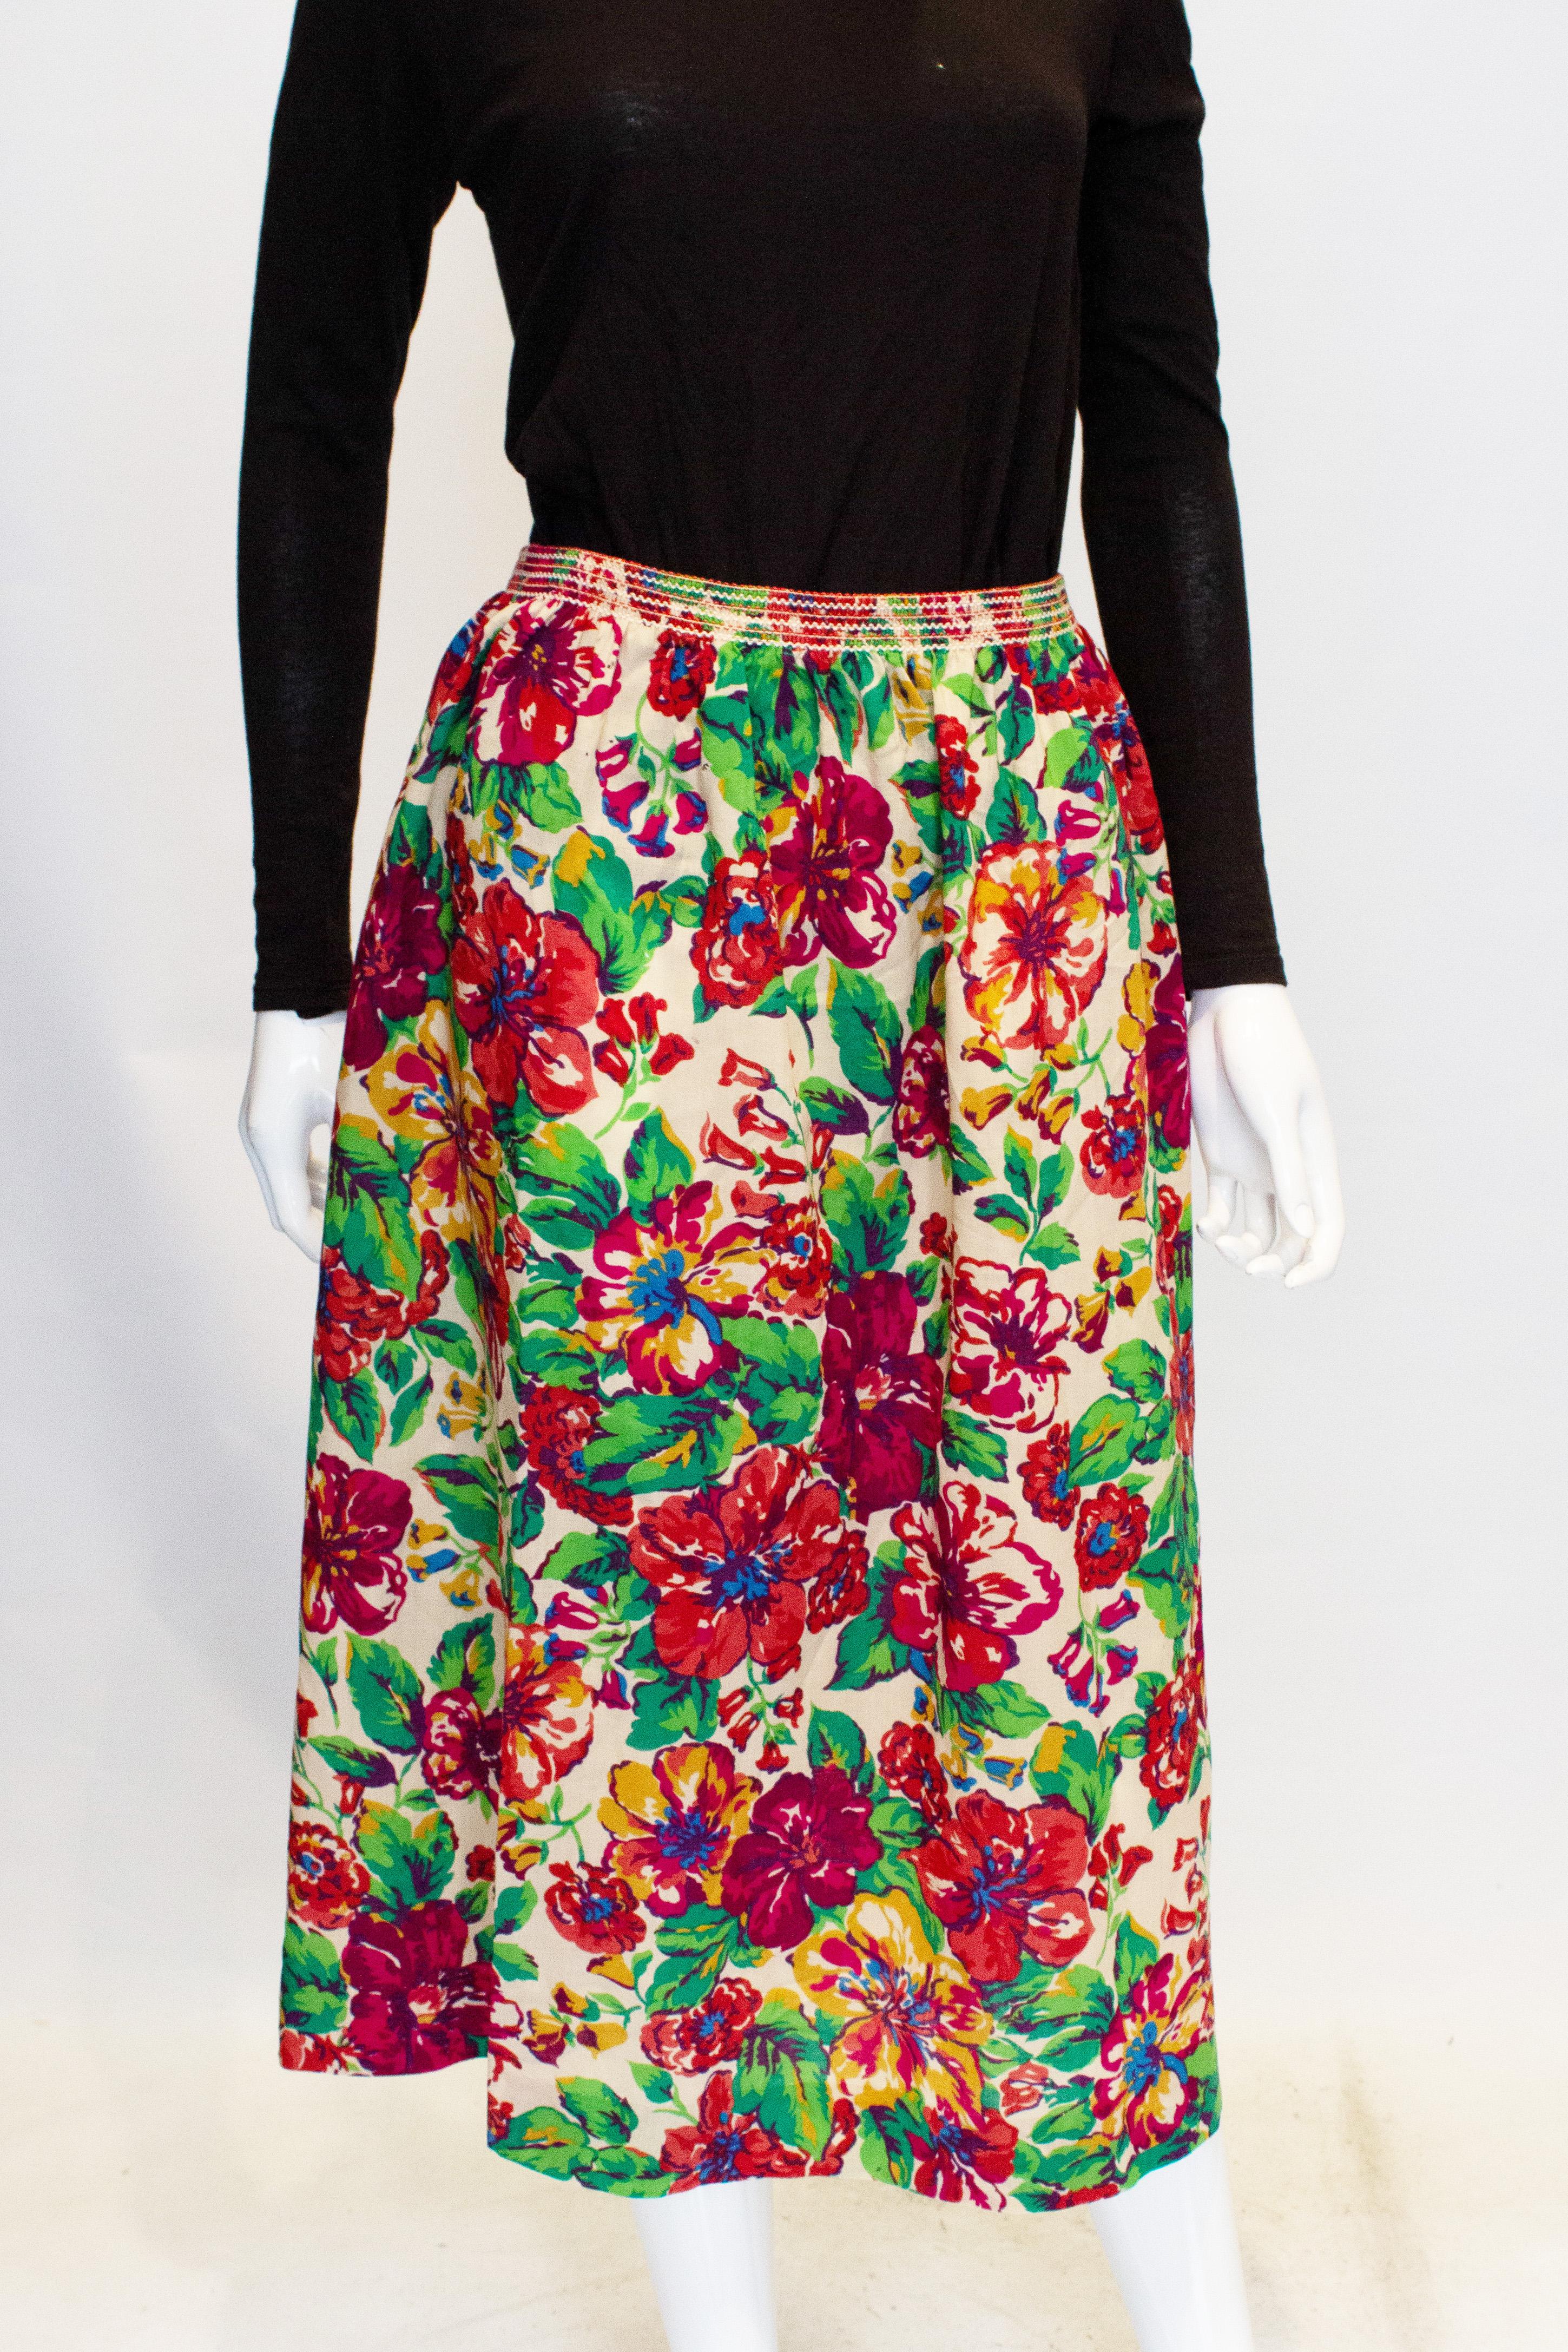 A pretty vintage wool skirt by Liberty of London.  The skirt has a cream background with a green and purple floral print. It has an elasticated waist, and will fit a waist 27 - 32'', length 33''.